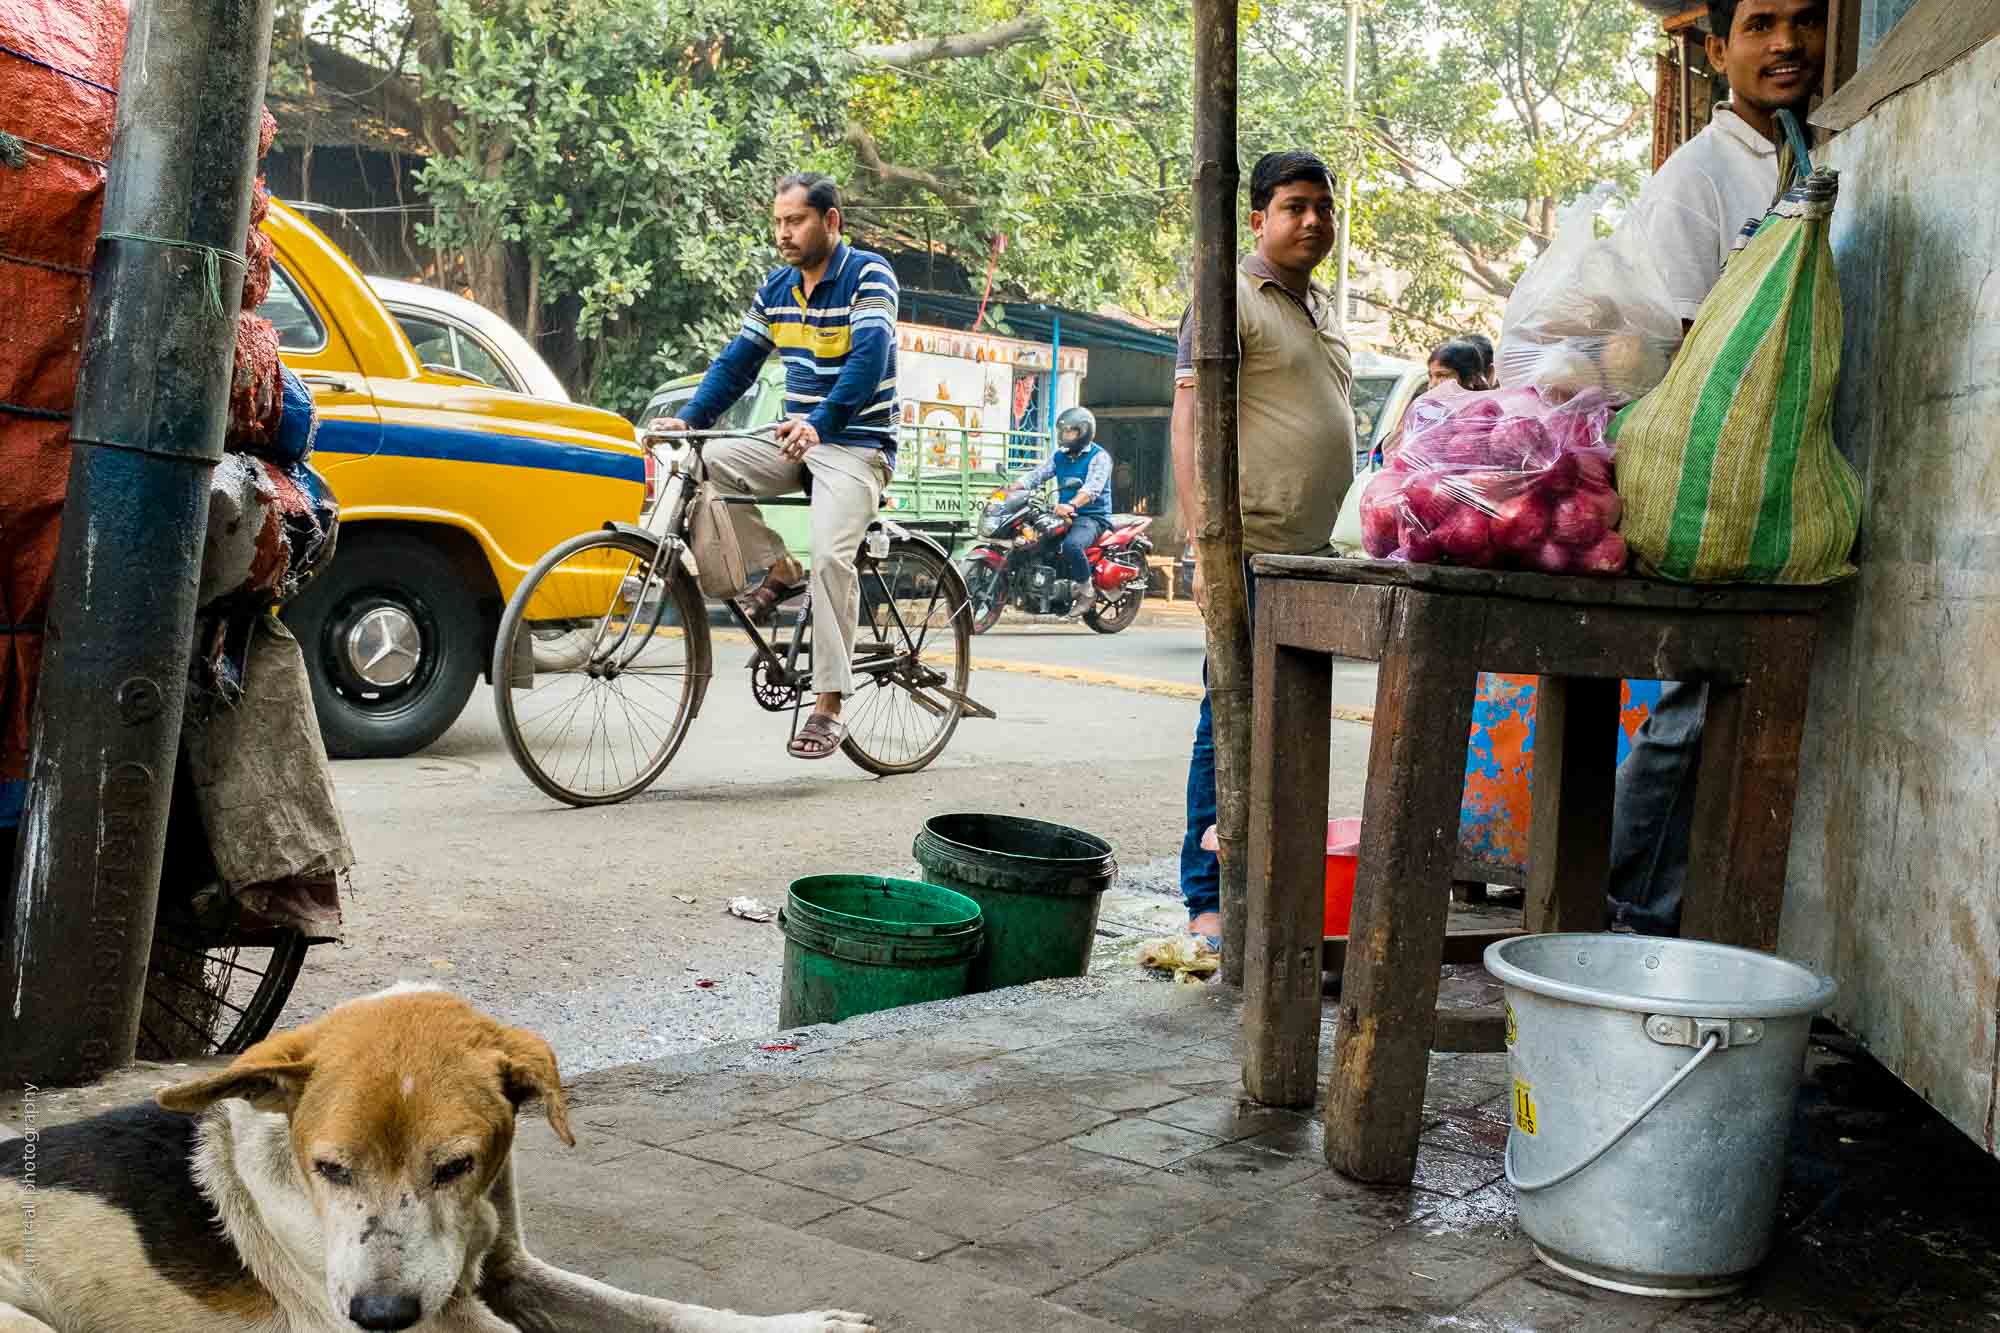 A busy day on the streets of Kolkata